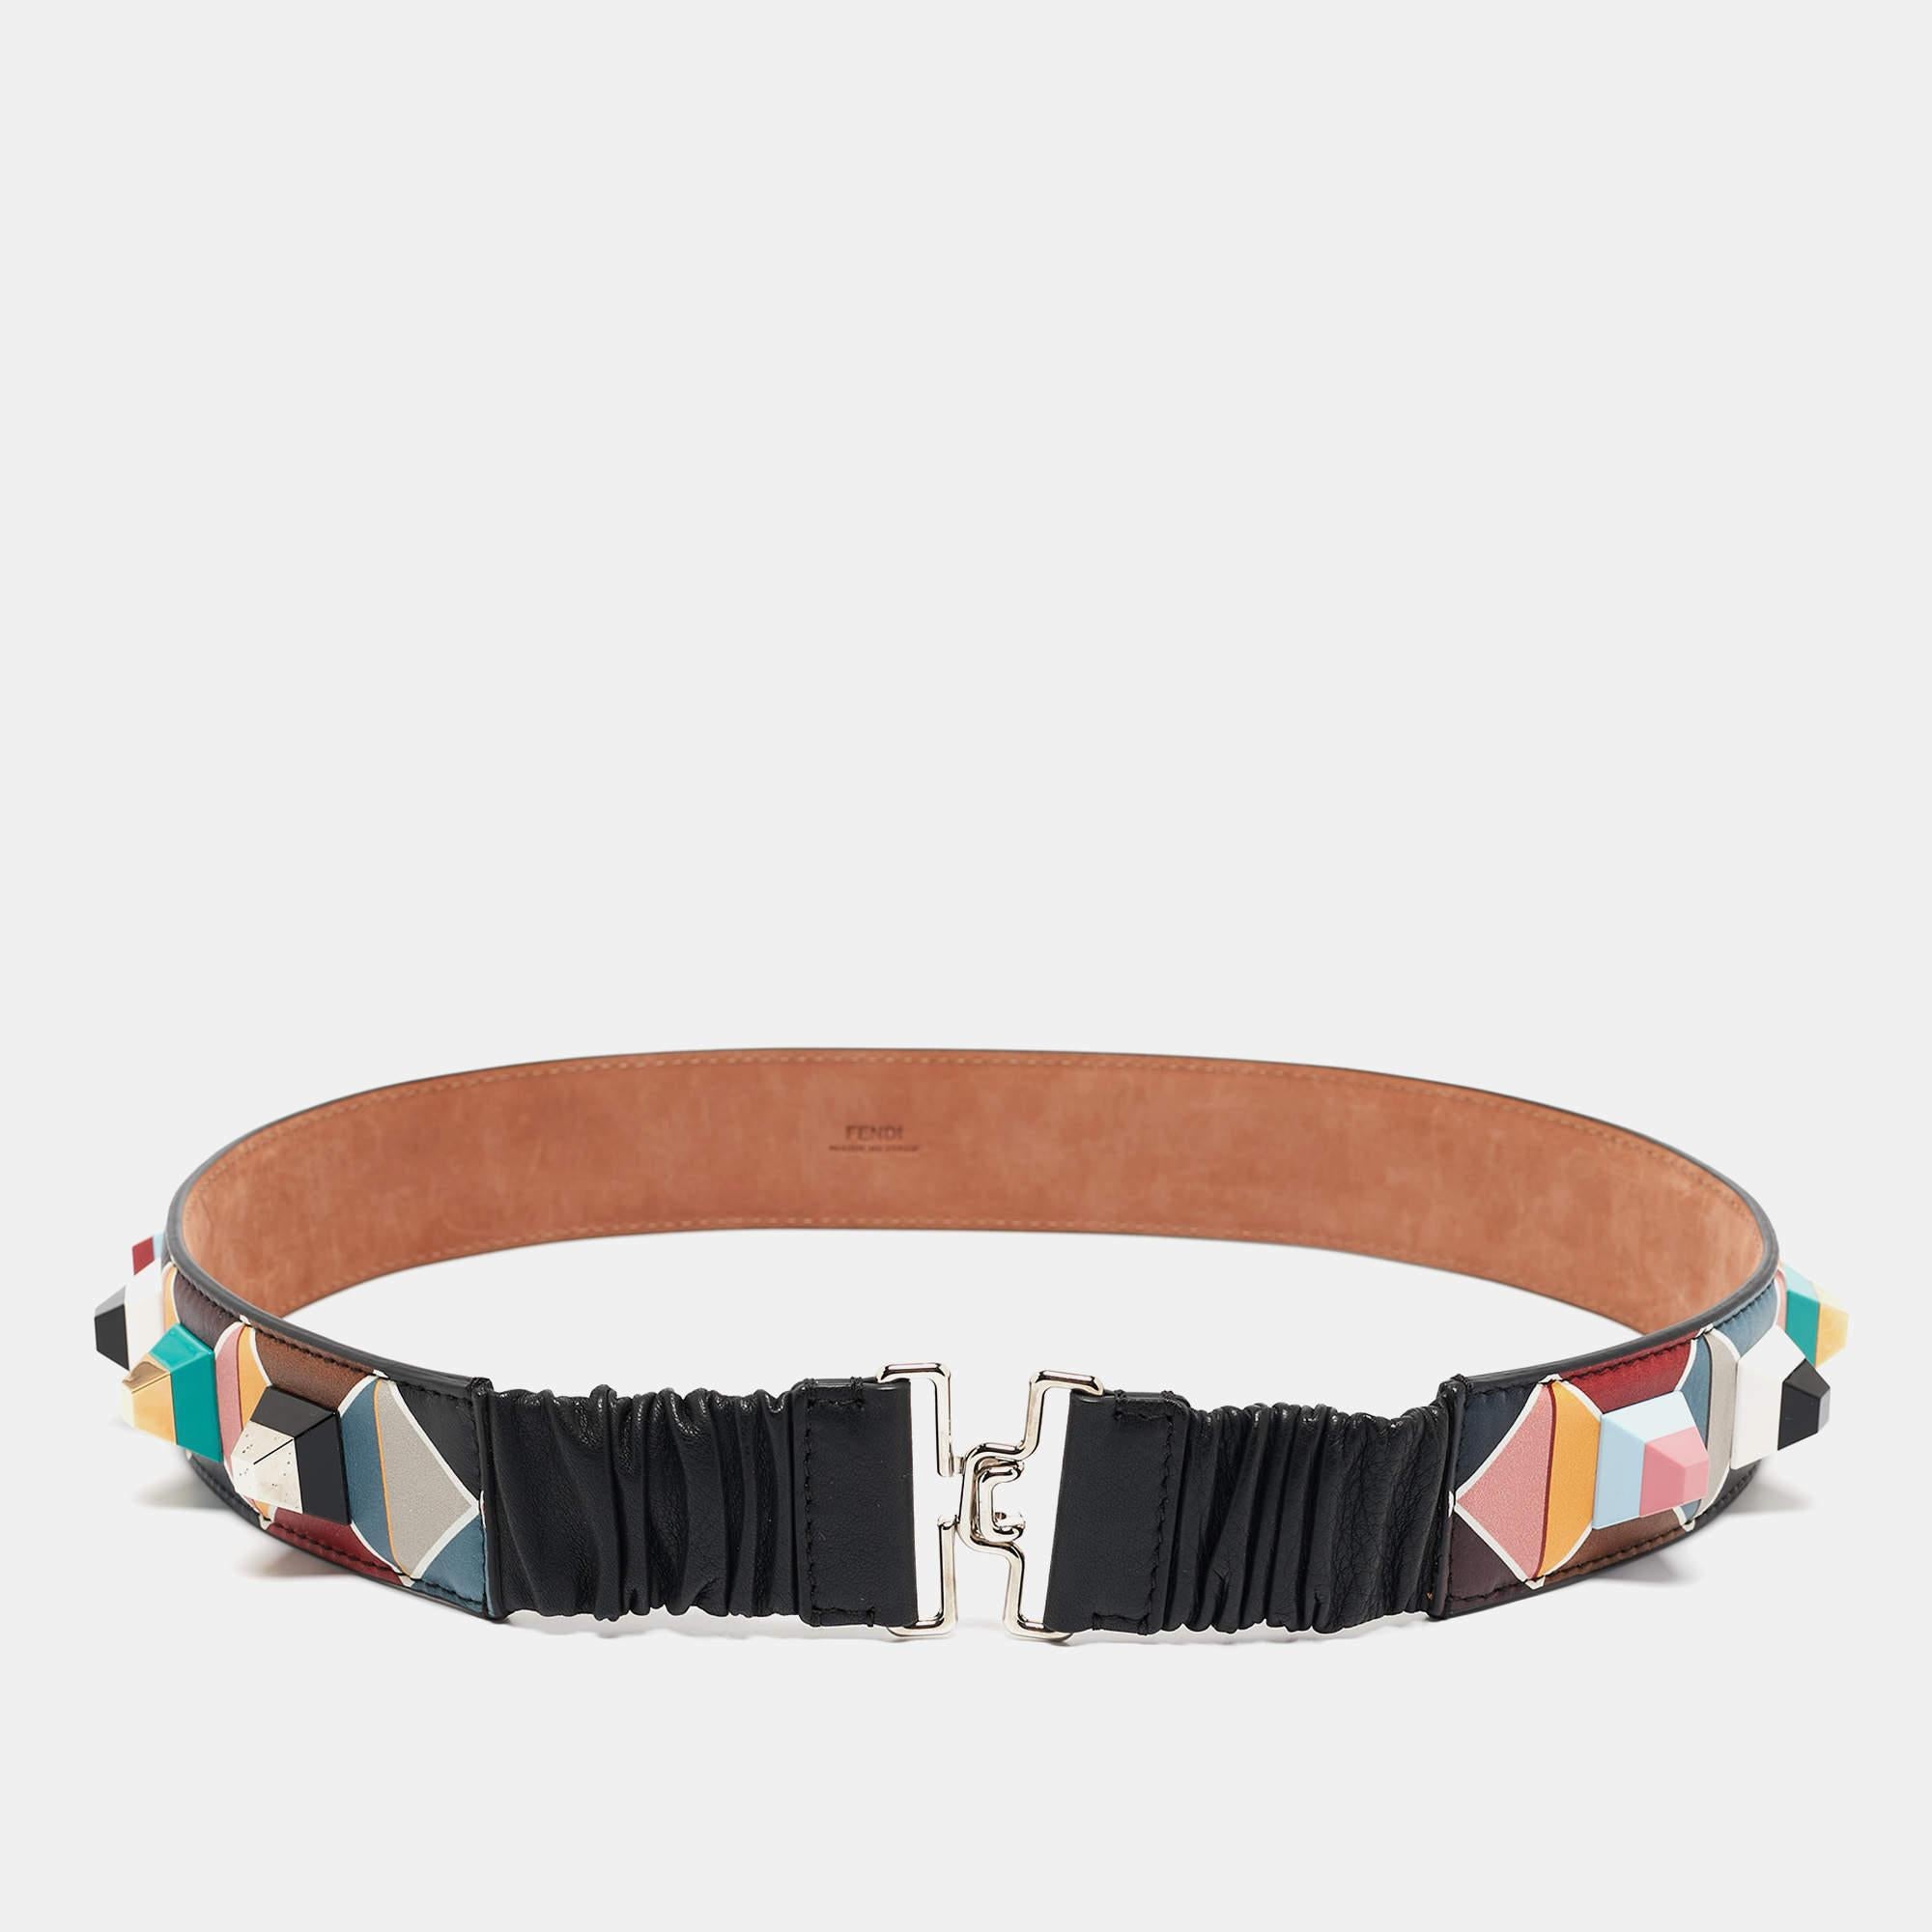 Embrace luxury with the Fendi belt. Crafted with precision, this accessory boasts a vibrant array of hues intricately printed on supple leather, accentuated by gleaming studs. Elevate any ensemble with its exquisite craftsmanship and timeless